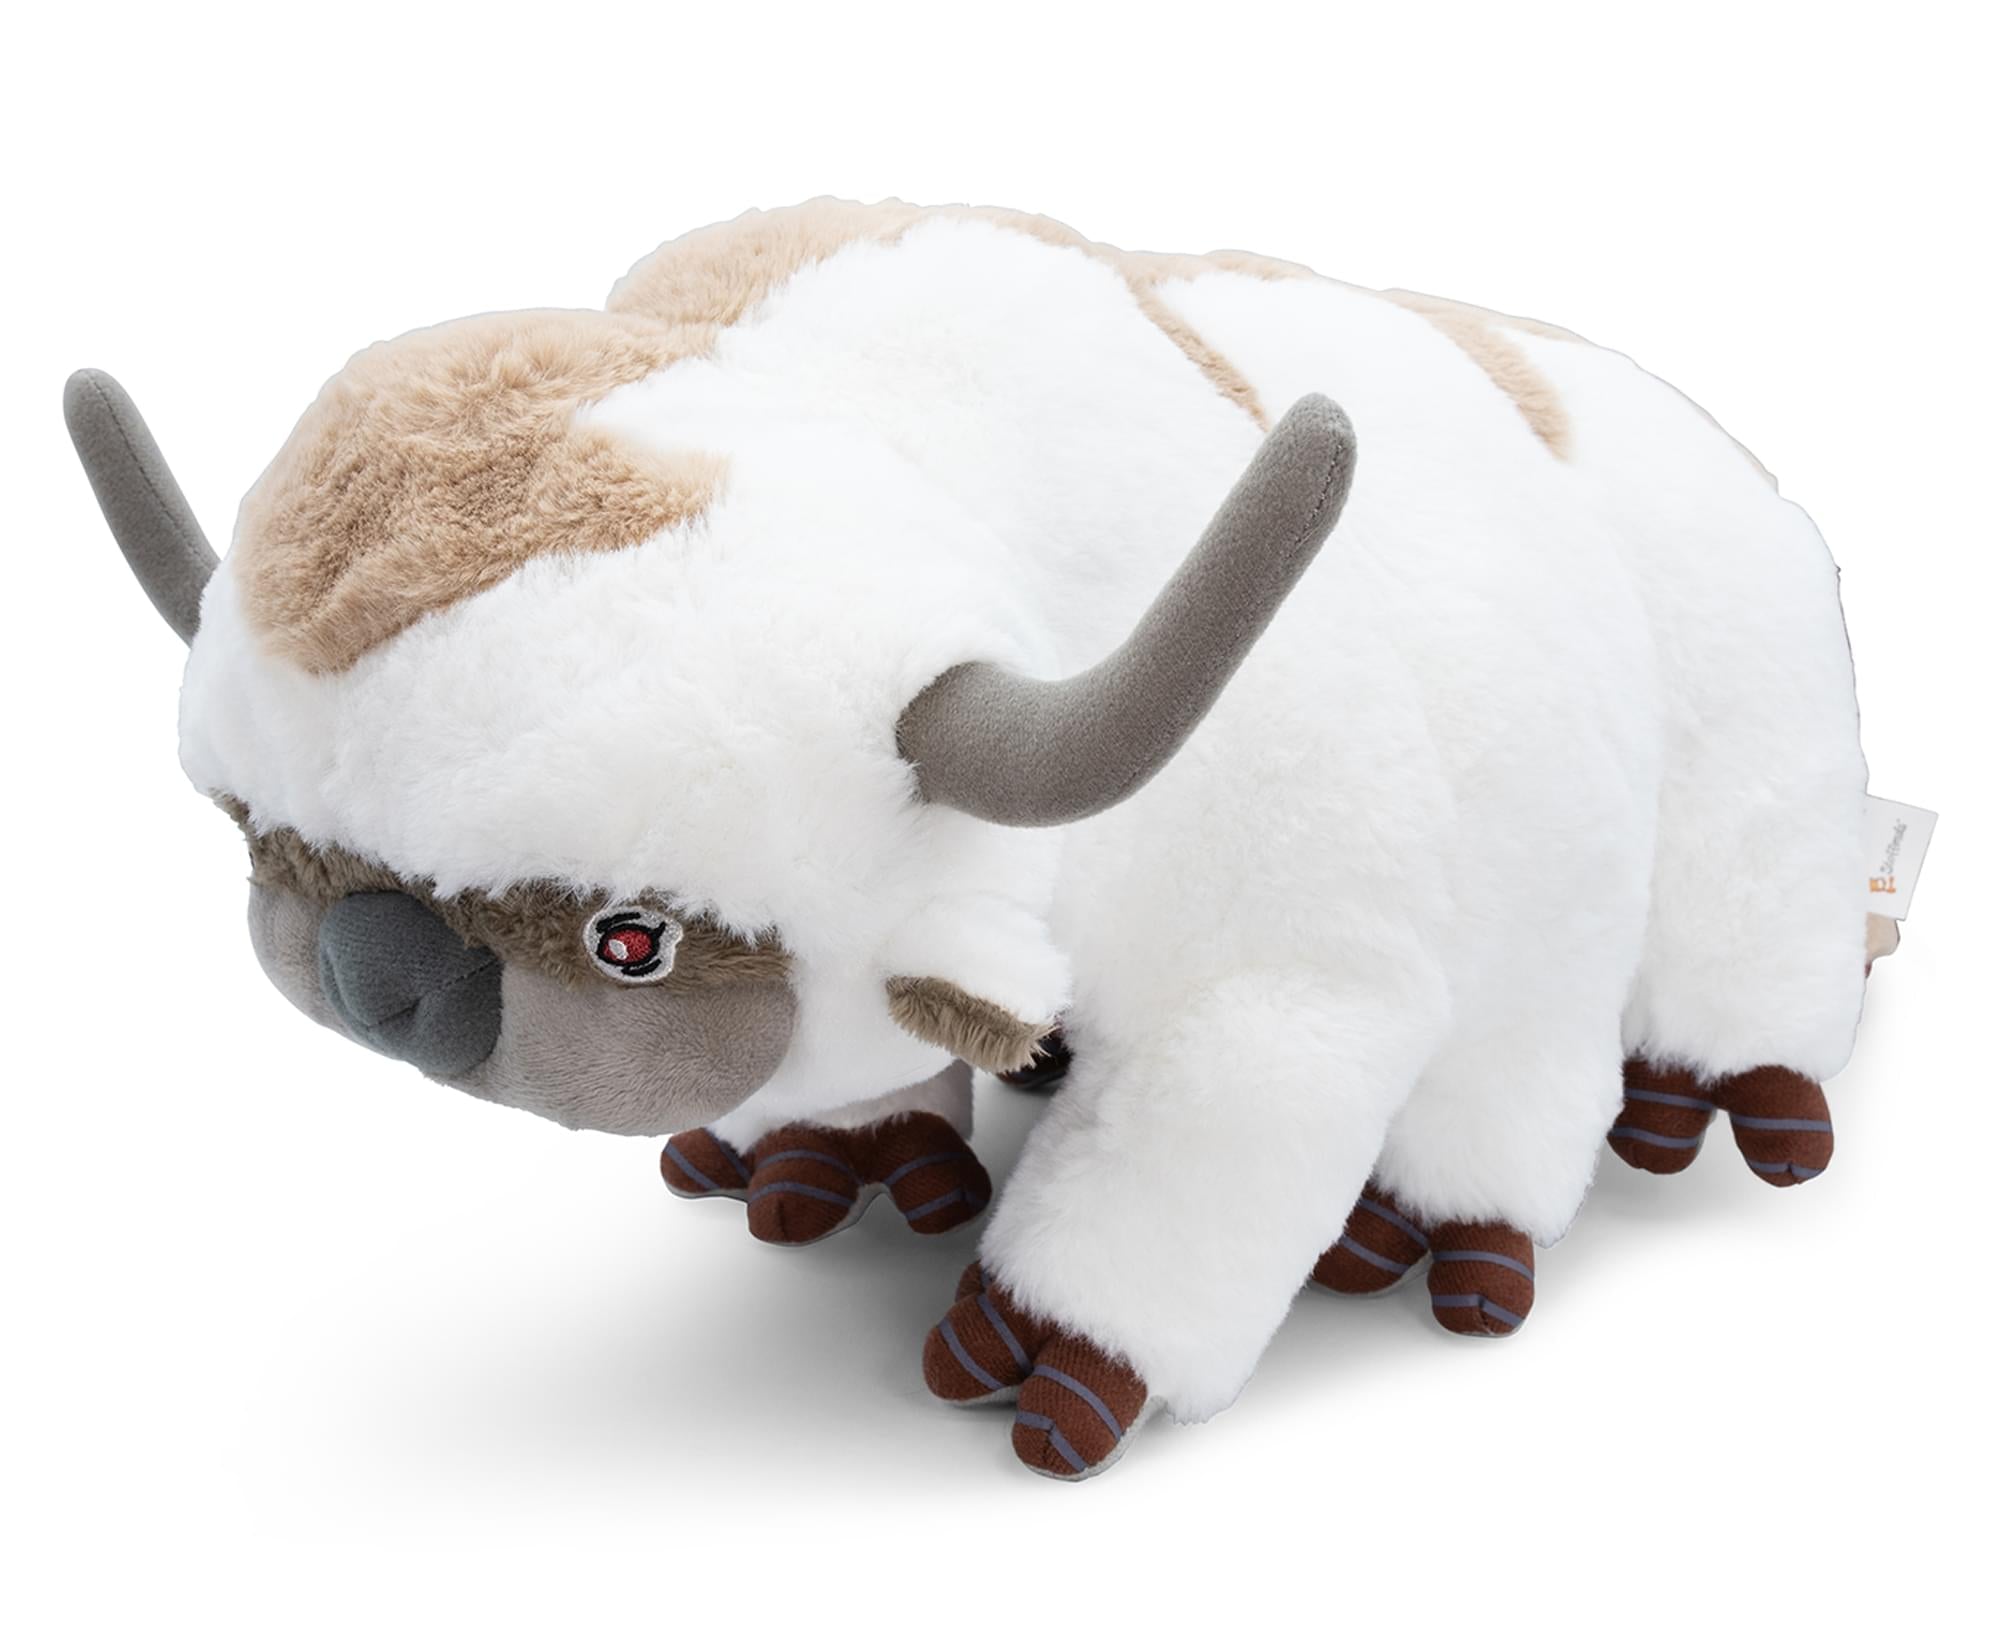 Avatar: The Last Airbender 15 Character Plush Toy , Appa